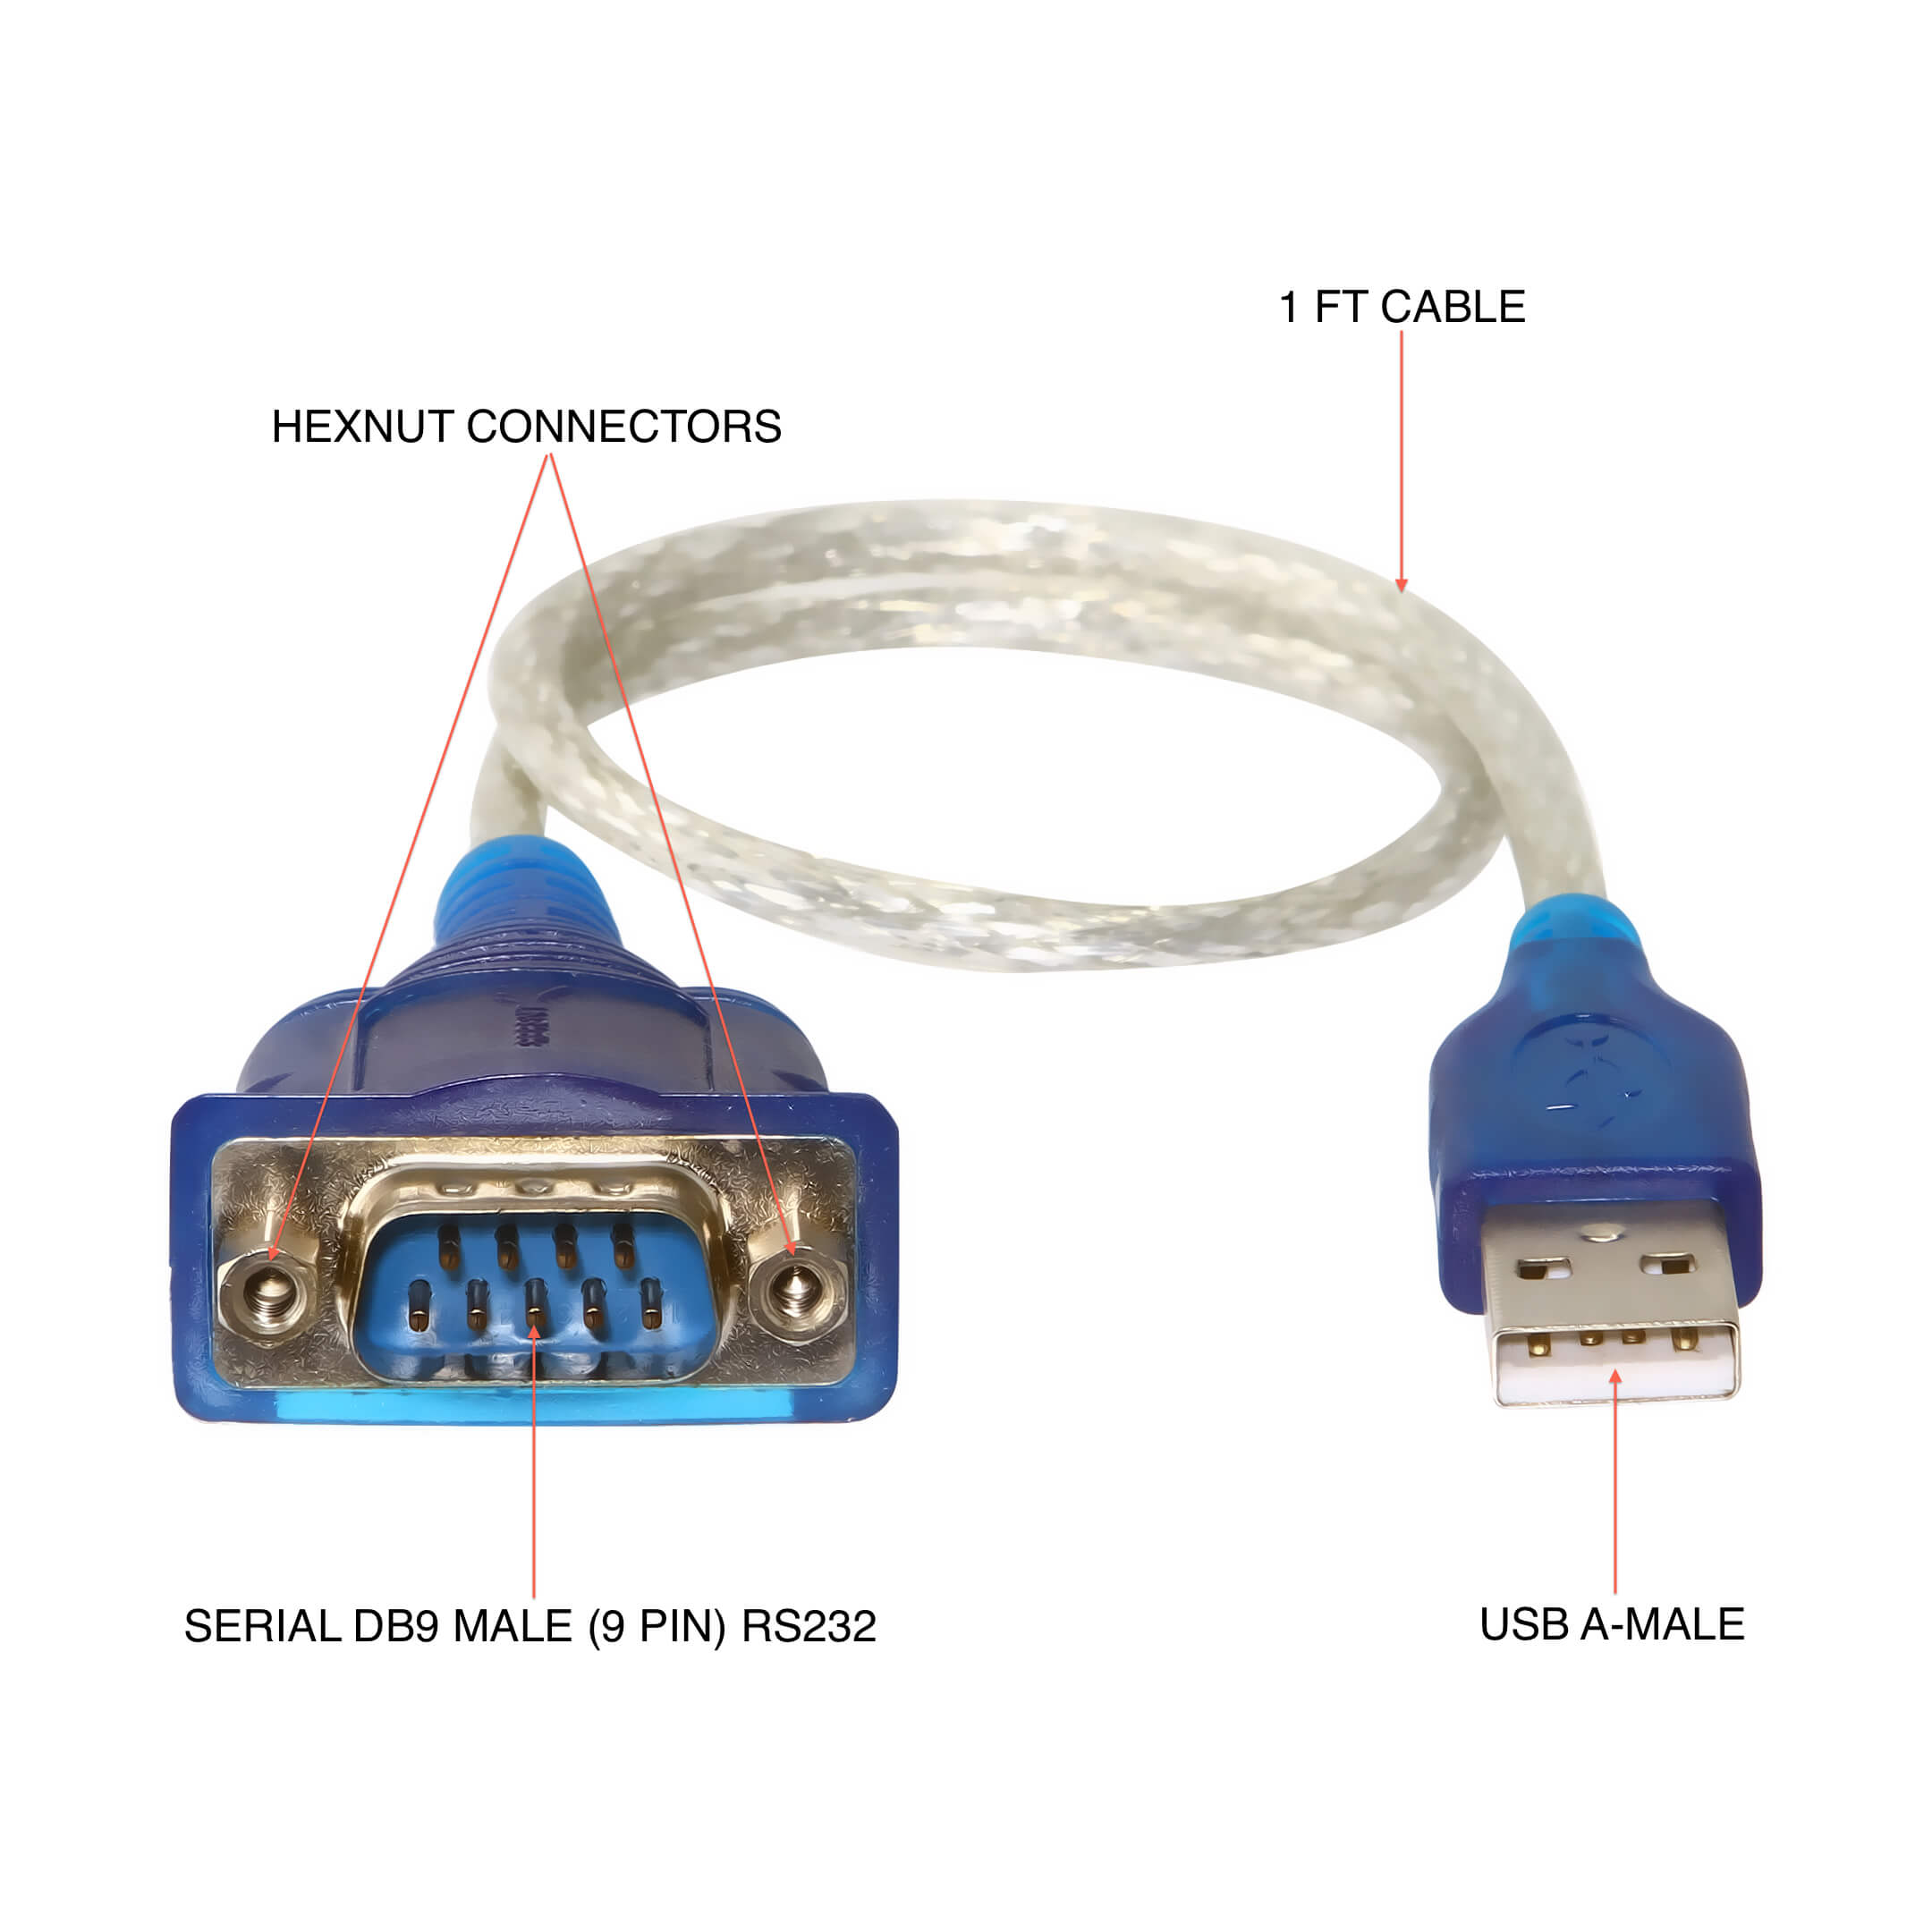 Rs232 serial cable pinout information